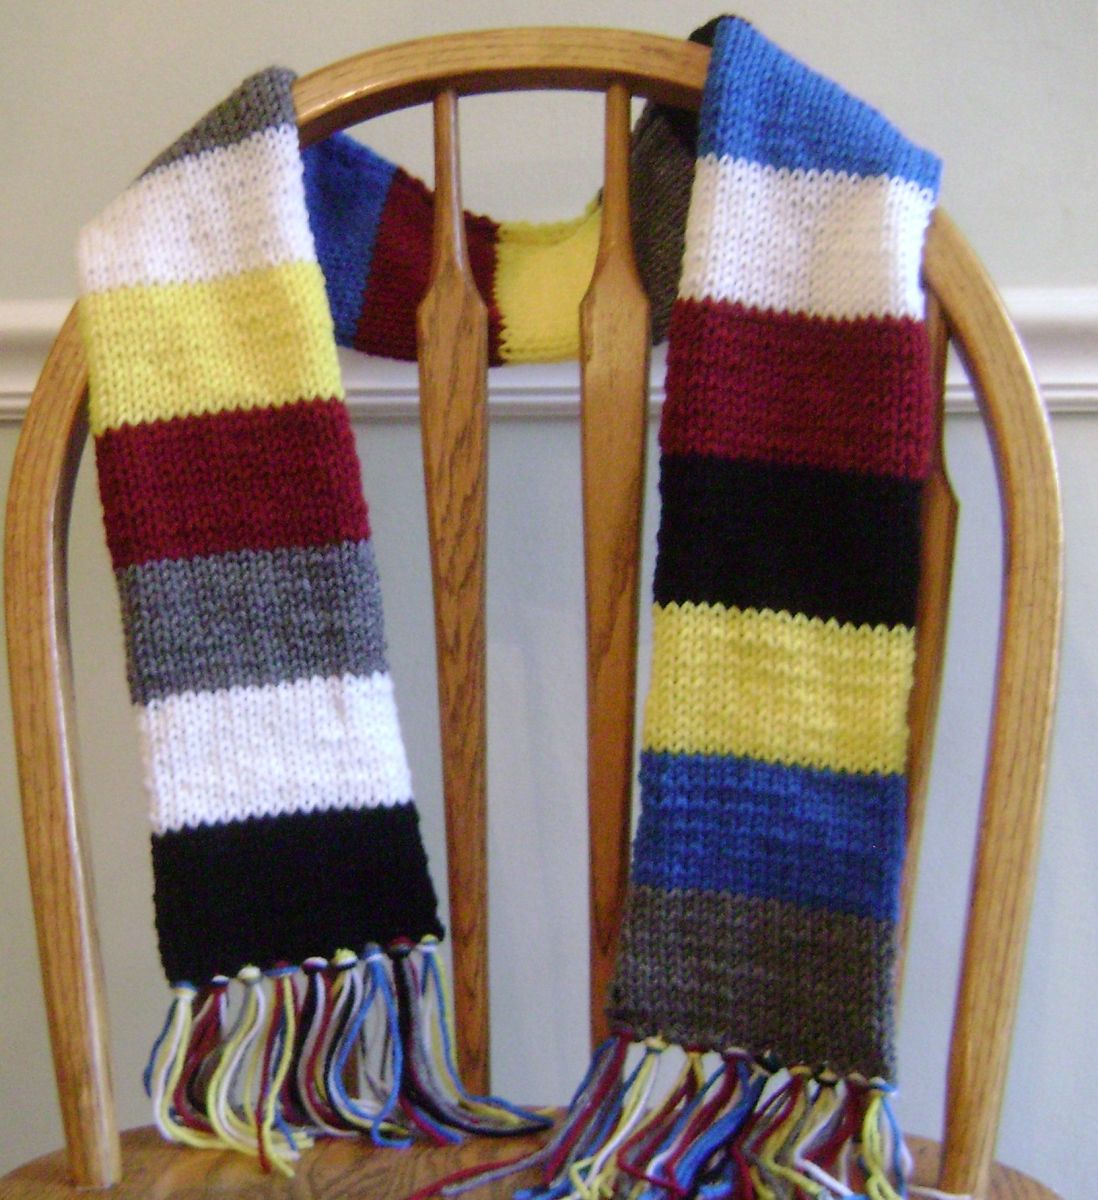 Tubular scarf in the faction colors from the novel "Divergent"